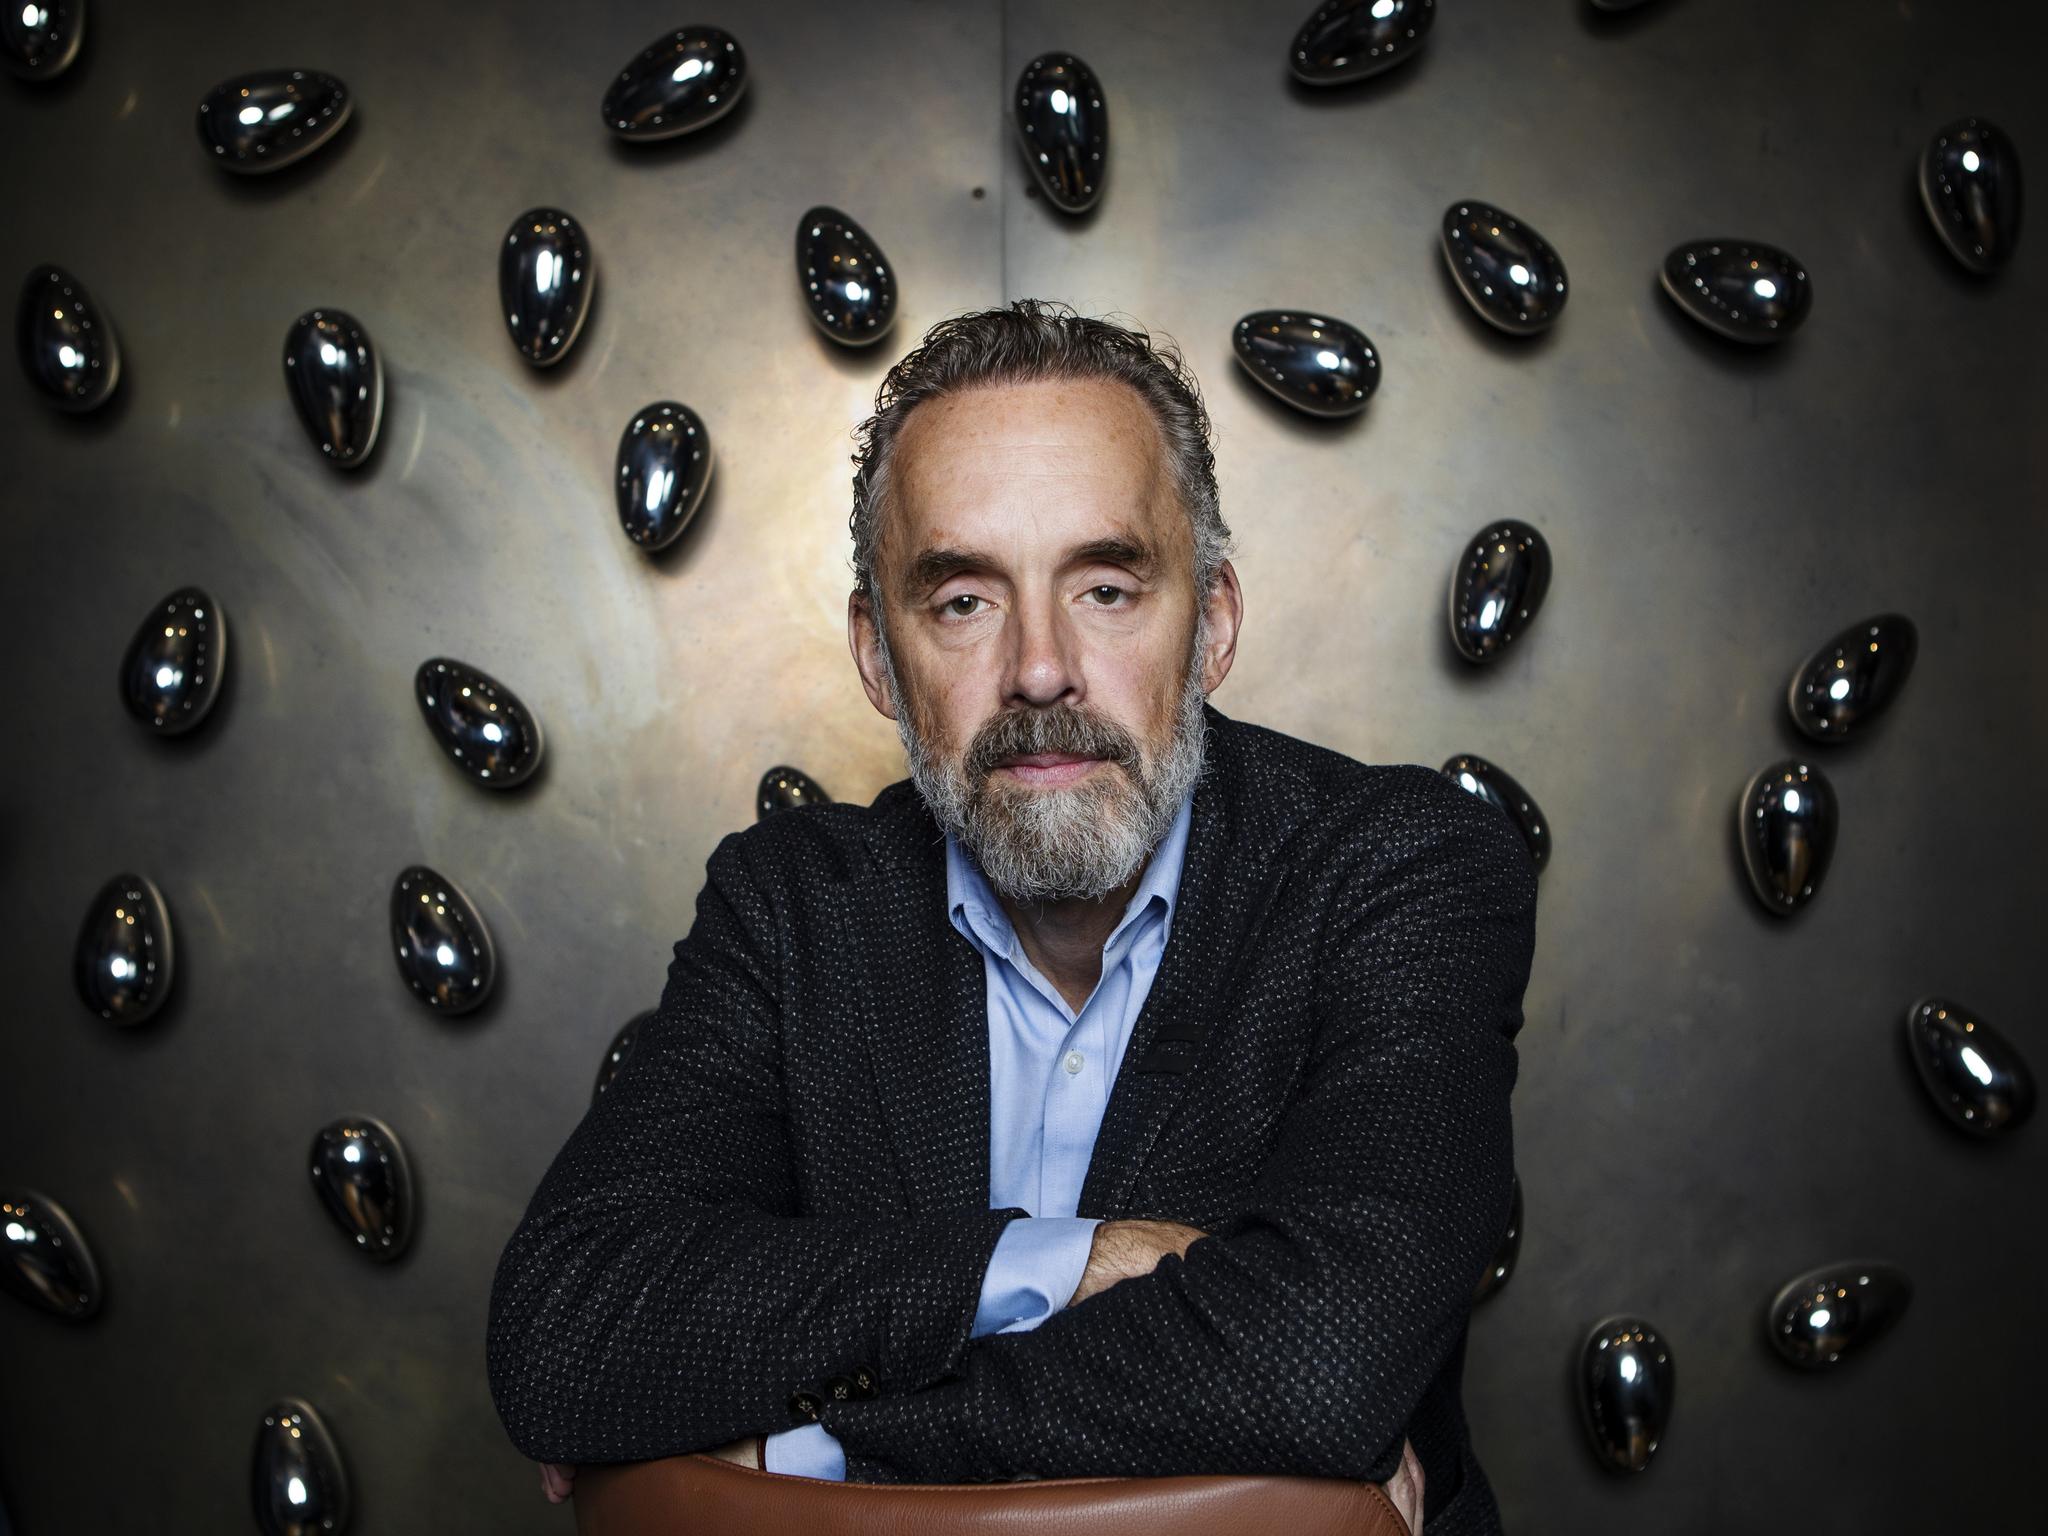 Reklame lever At søge tilflugt The mysterious rise and fall of Jordan Peterson | The Australian